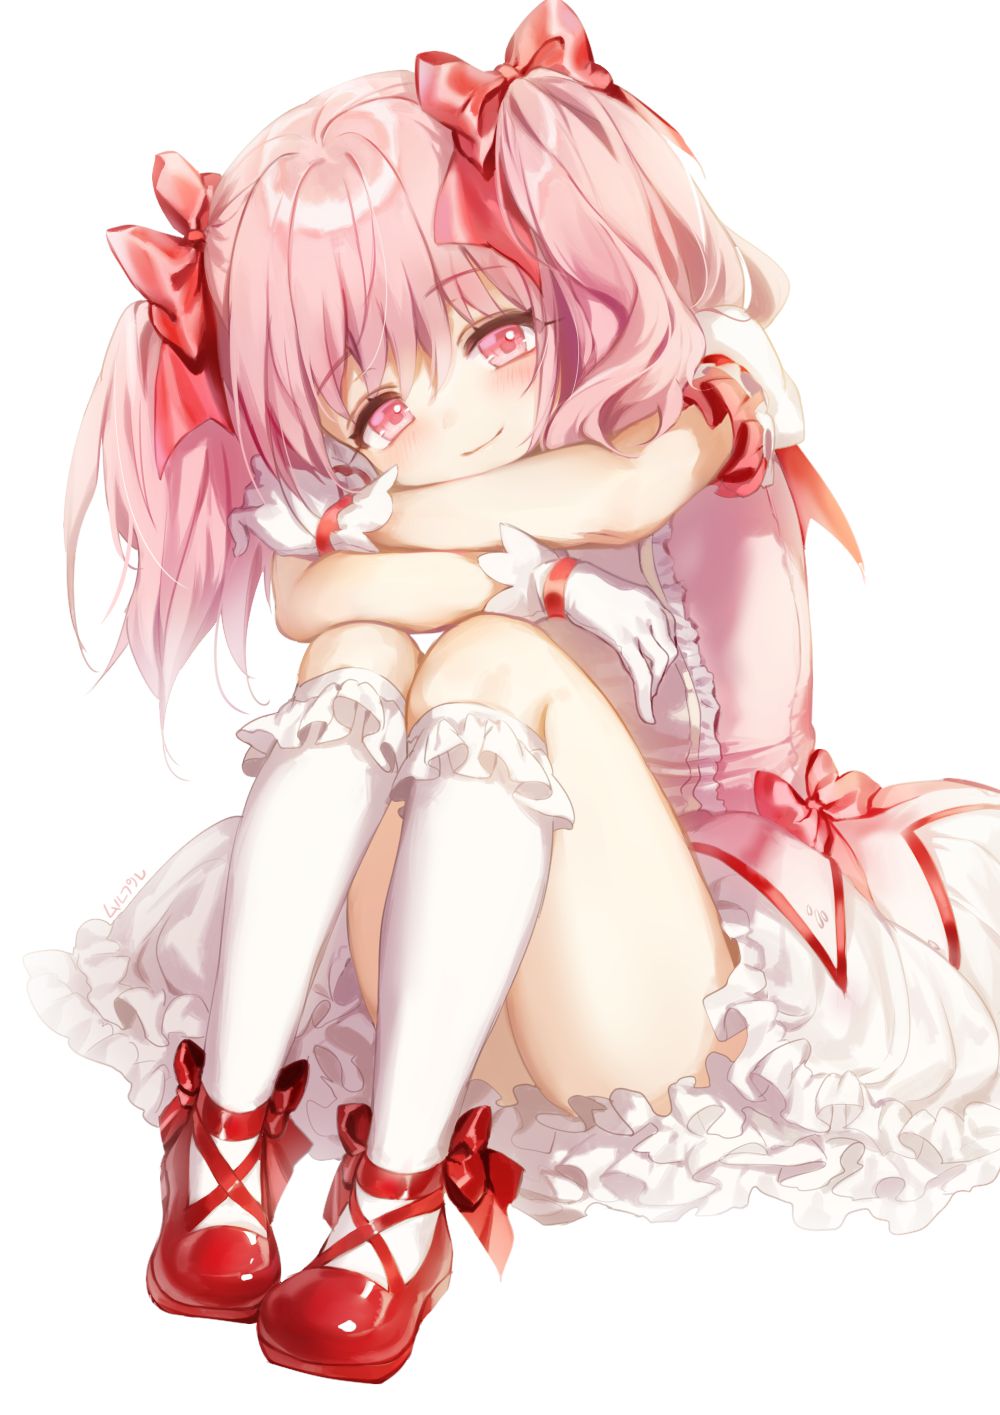 Kaname Madoka "I do not see it with naughty eyes because it is a magical girl..." ← This W, W, W 6